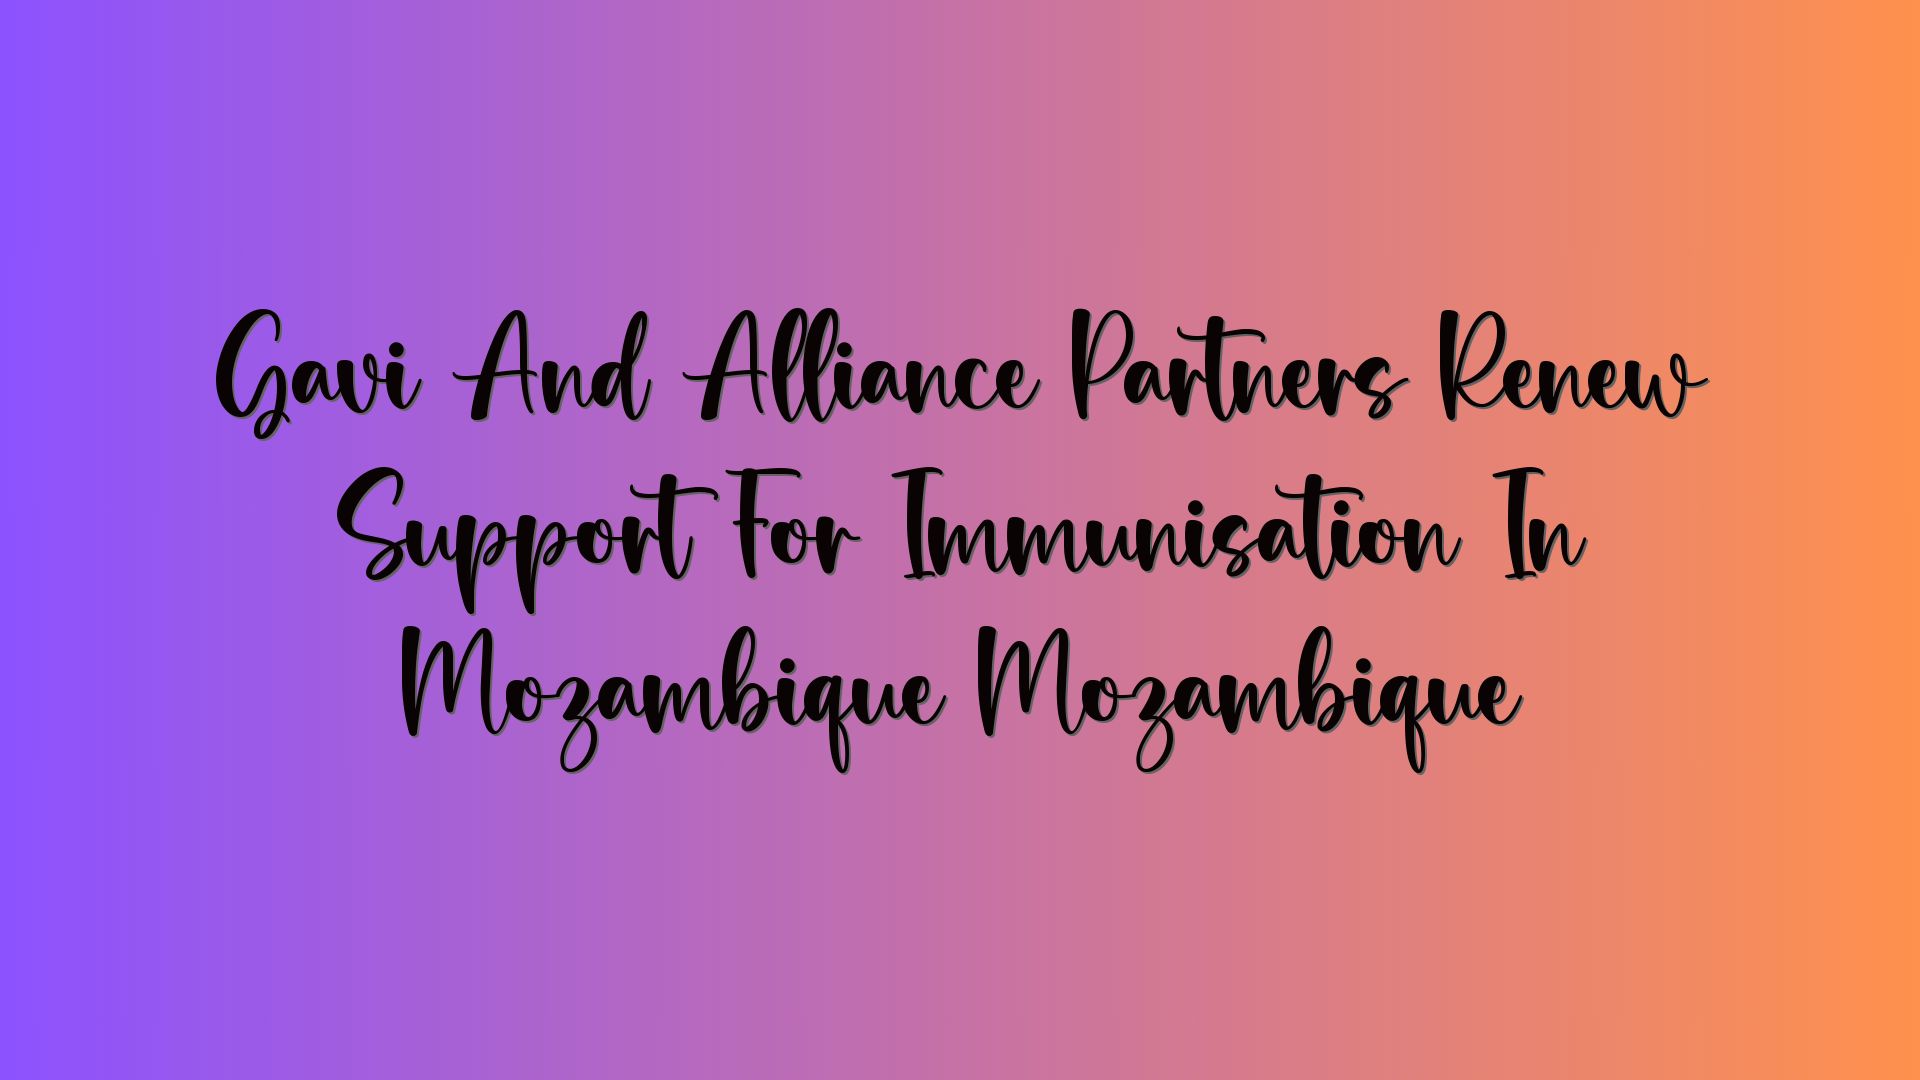 Gavi And Alliance Partners Renew Support For Immunisation In Mozambique Mozambique